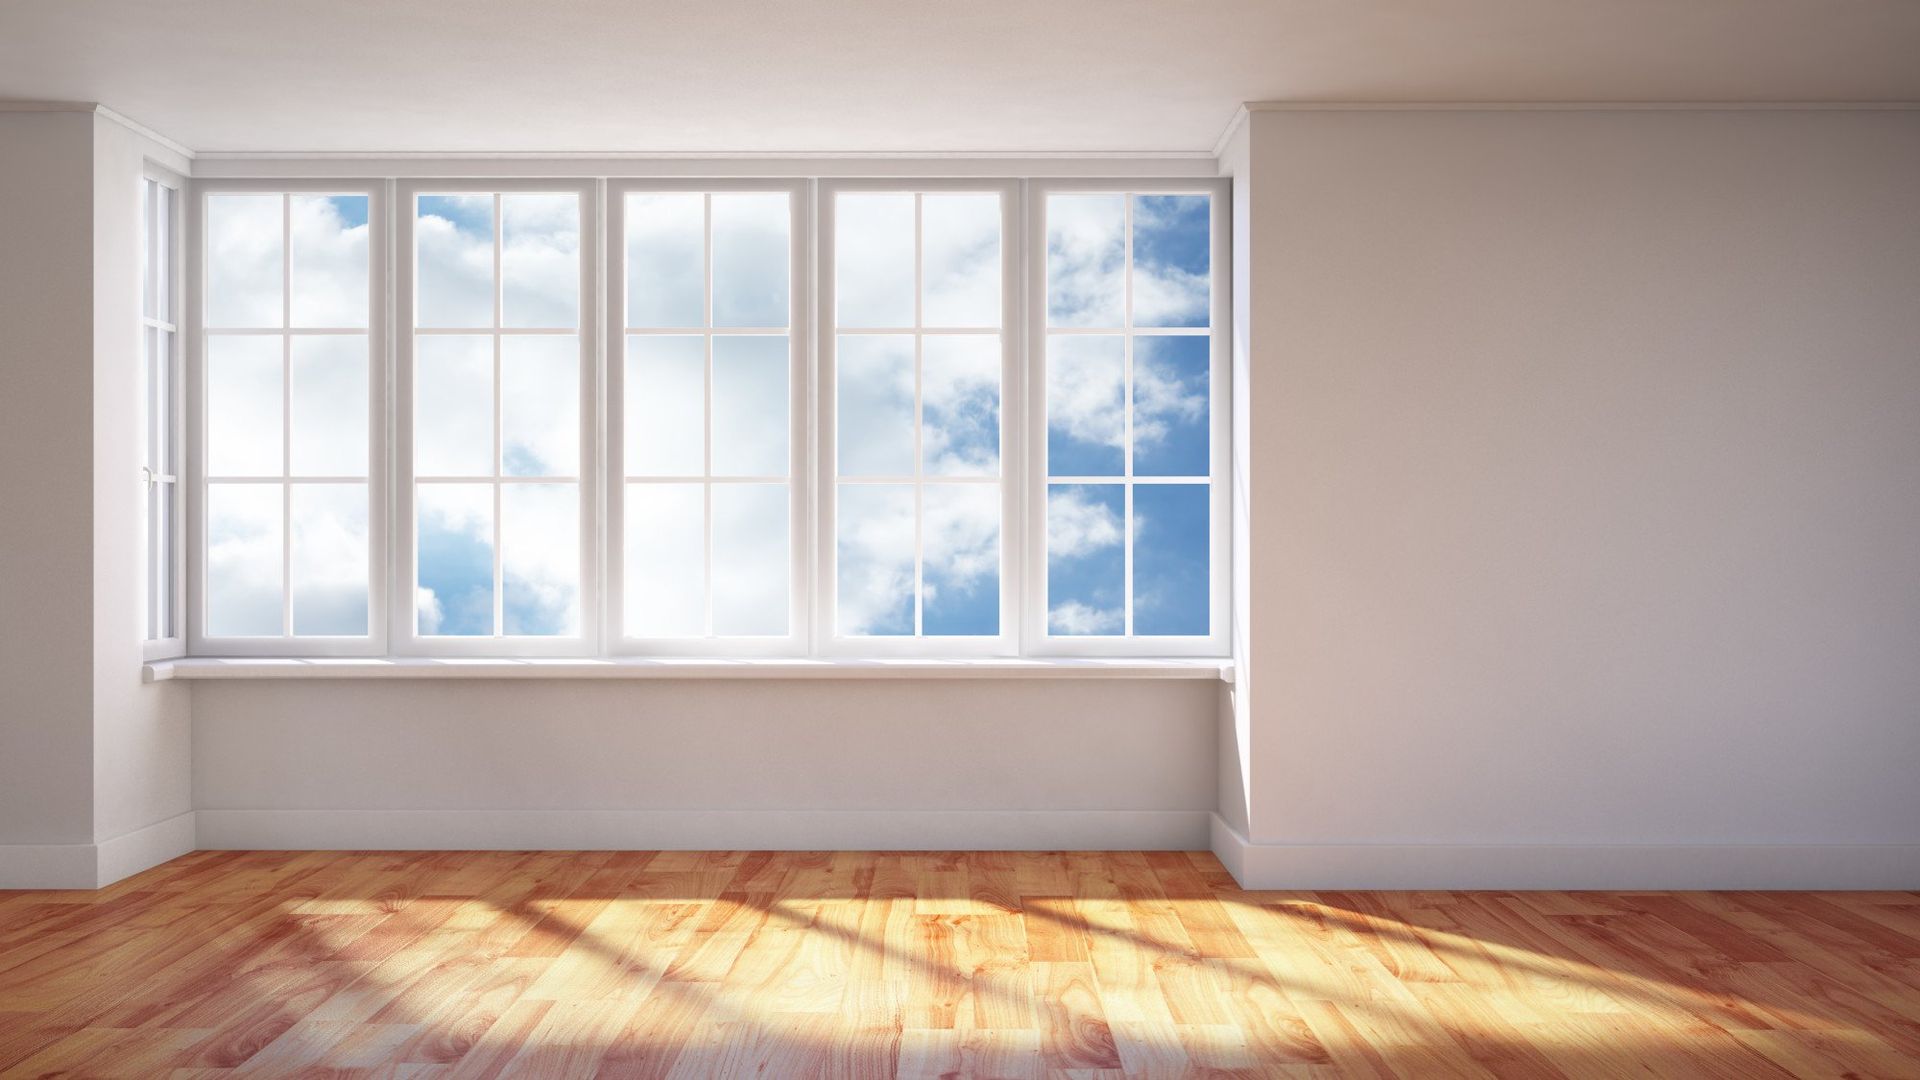 The Window Retrofit: When It's Time to Upgrade Your Home